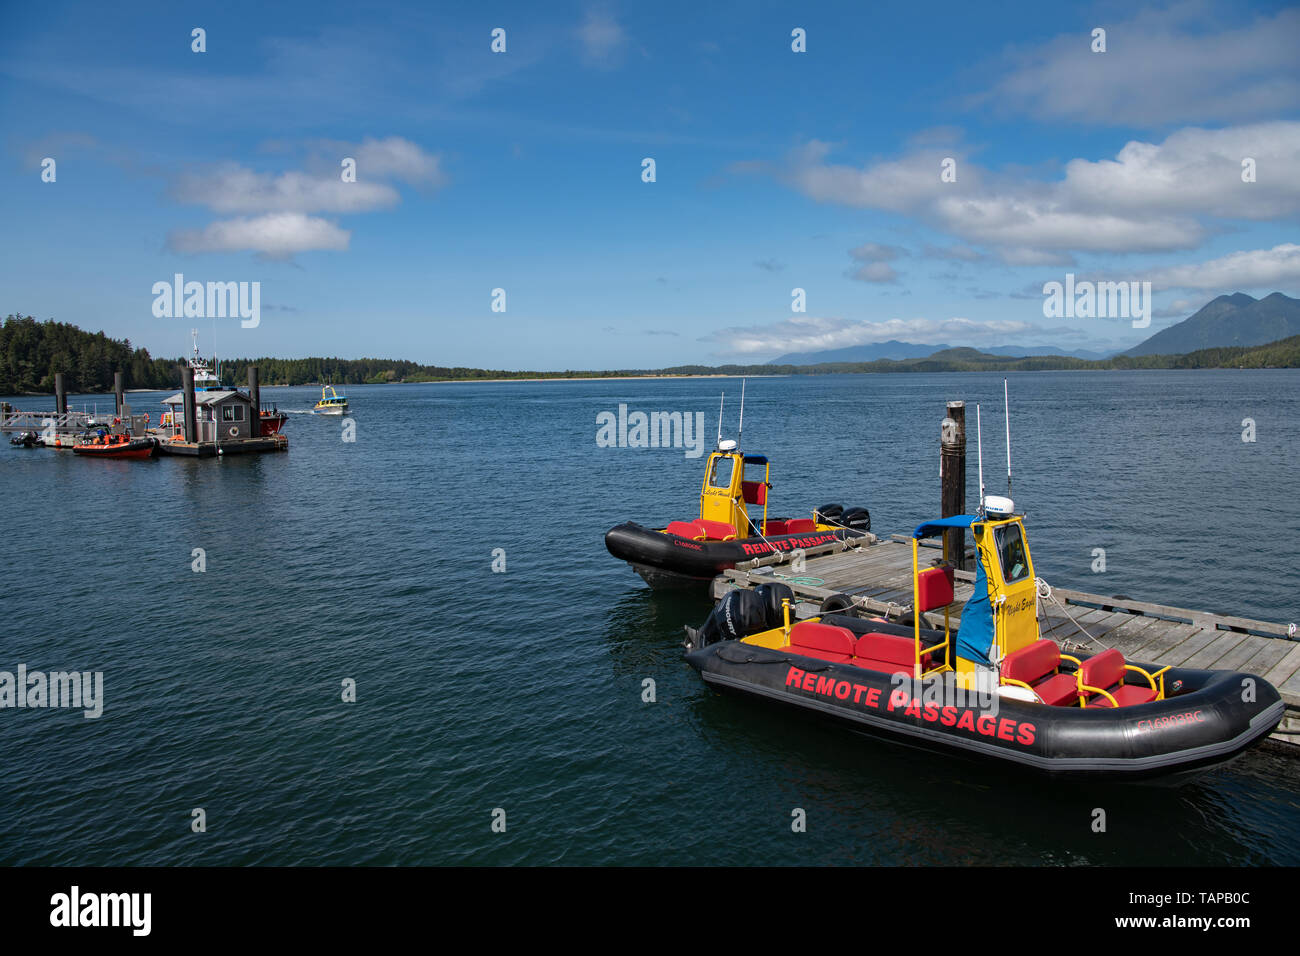 zodiac boats used for bear watching trips in Tofino Vancouver Island British Columbia, Canada Stock Photo